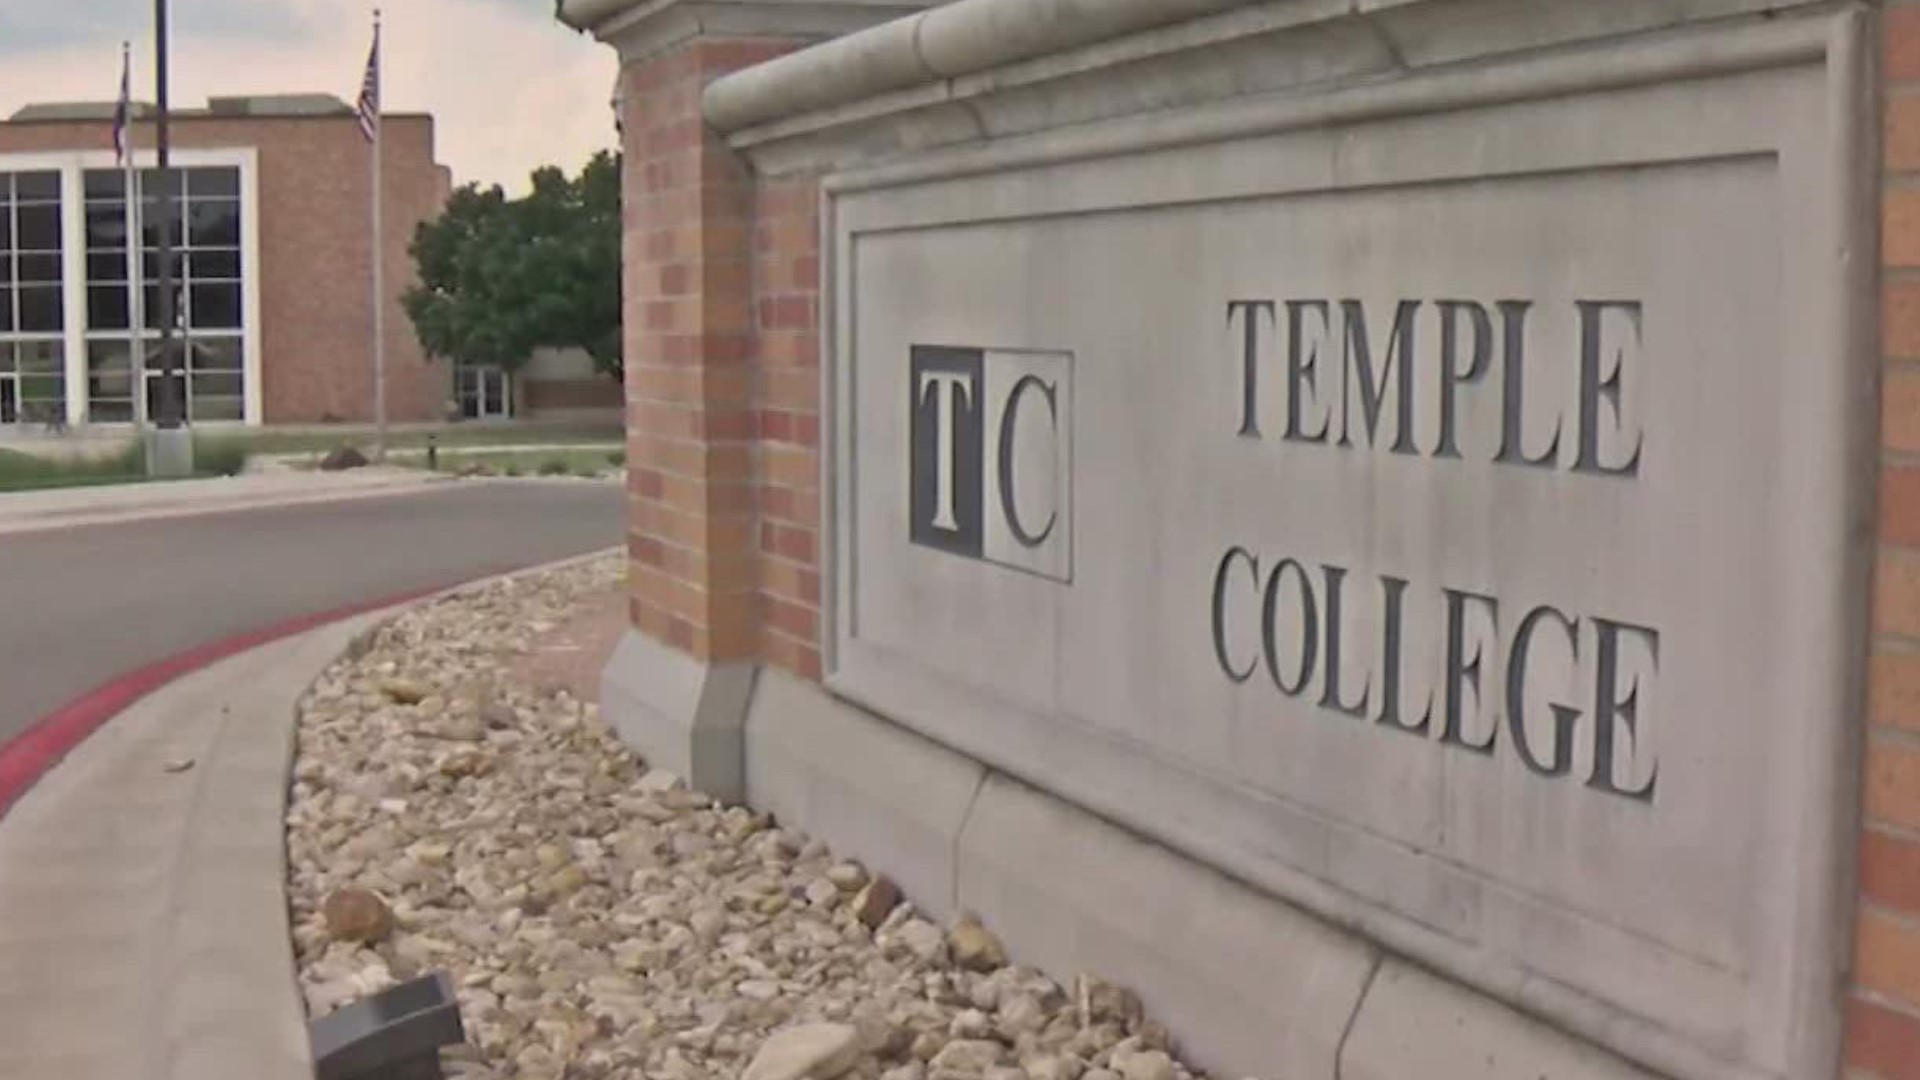 A major focus is to get more students at Temple High School enrolled in dual credit classes that focus on cybersecurity.